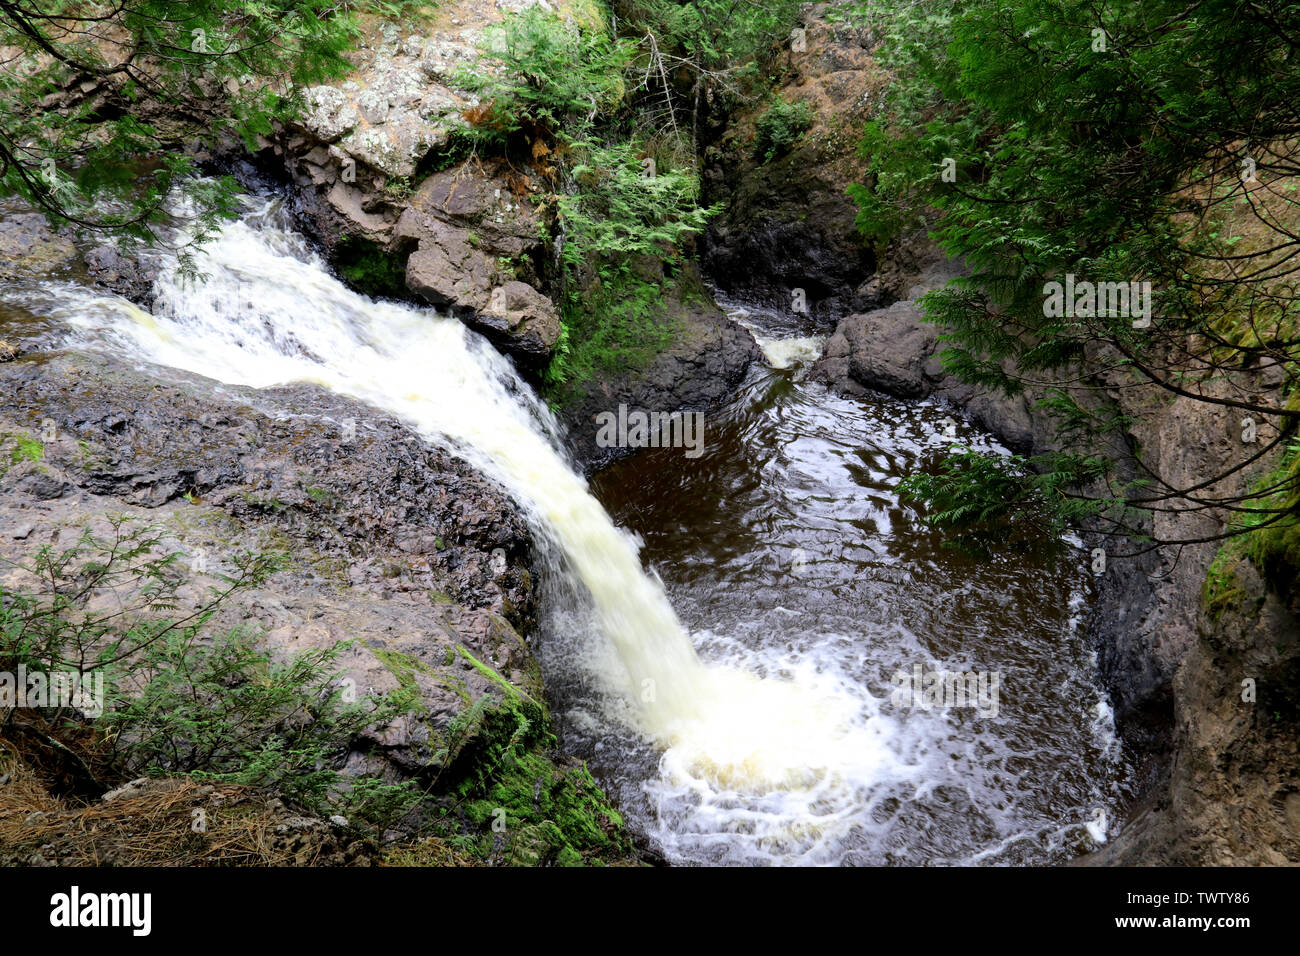 Above view of a Waterfall falling into a pool Stock Photo